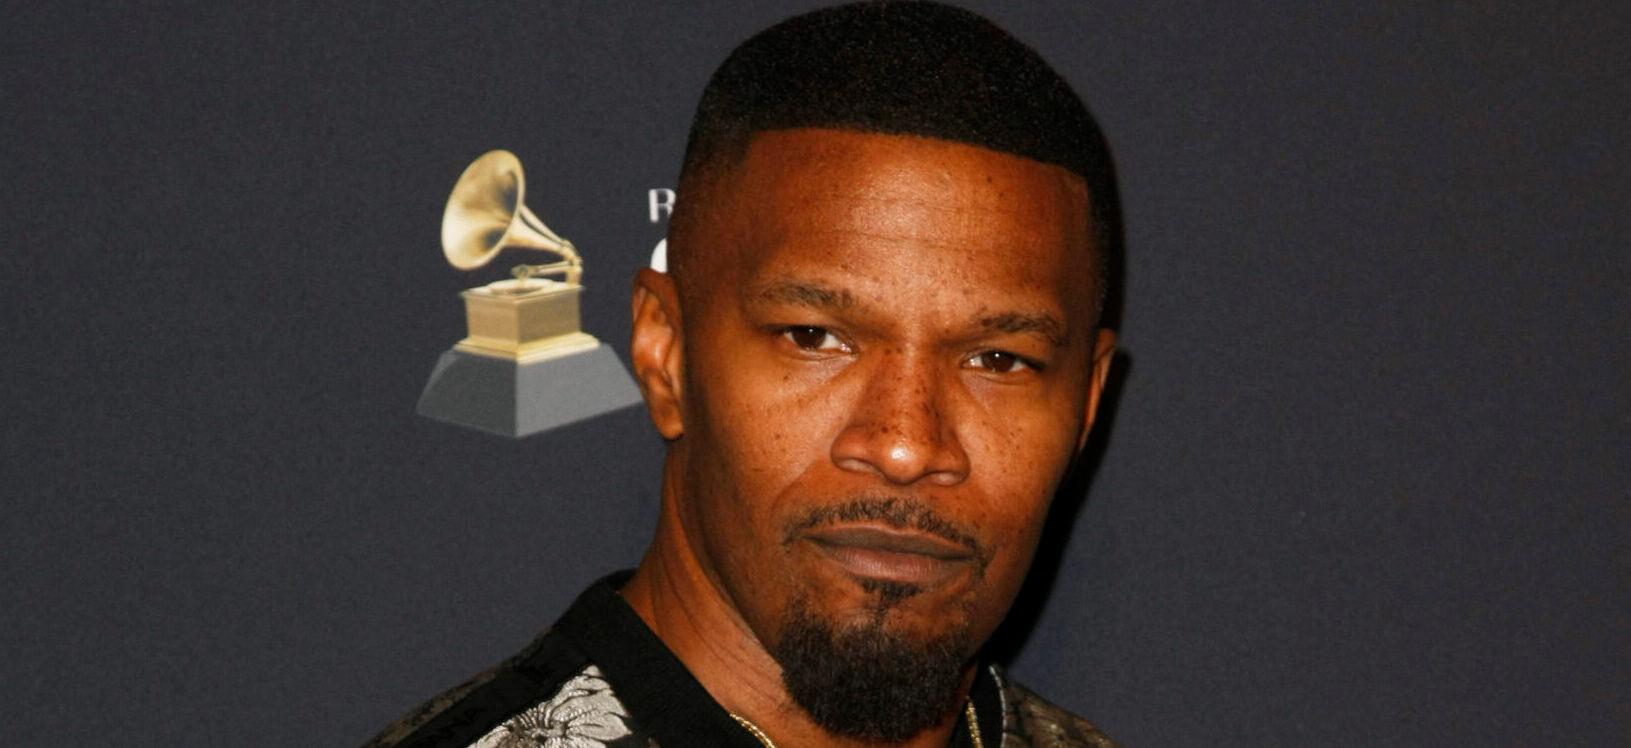 Jamie Foxx Has Allegedly Returned To Work For The First Time In Three Months For A Commercial